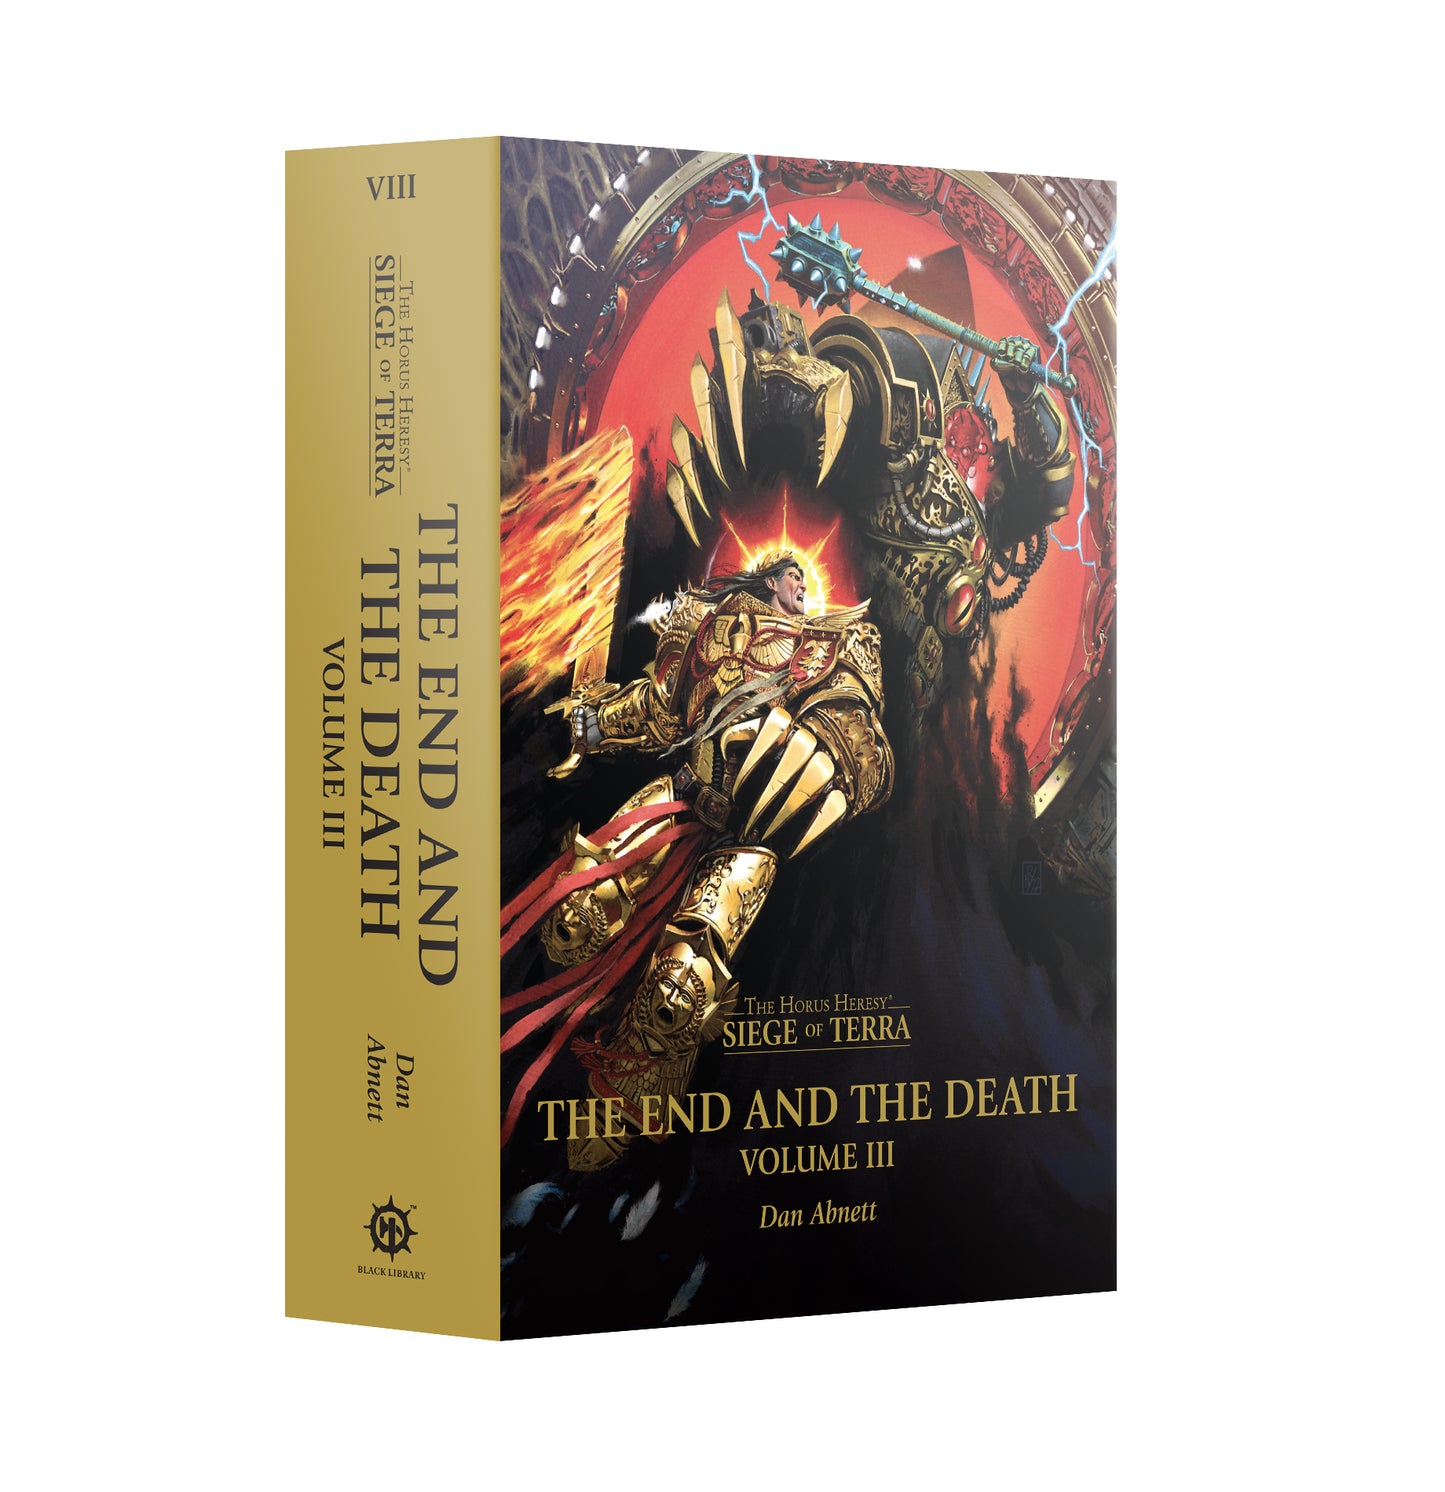 Horus Heresy Siege Of Terra: The End And The Death Volume 3 (Hardback) (English)